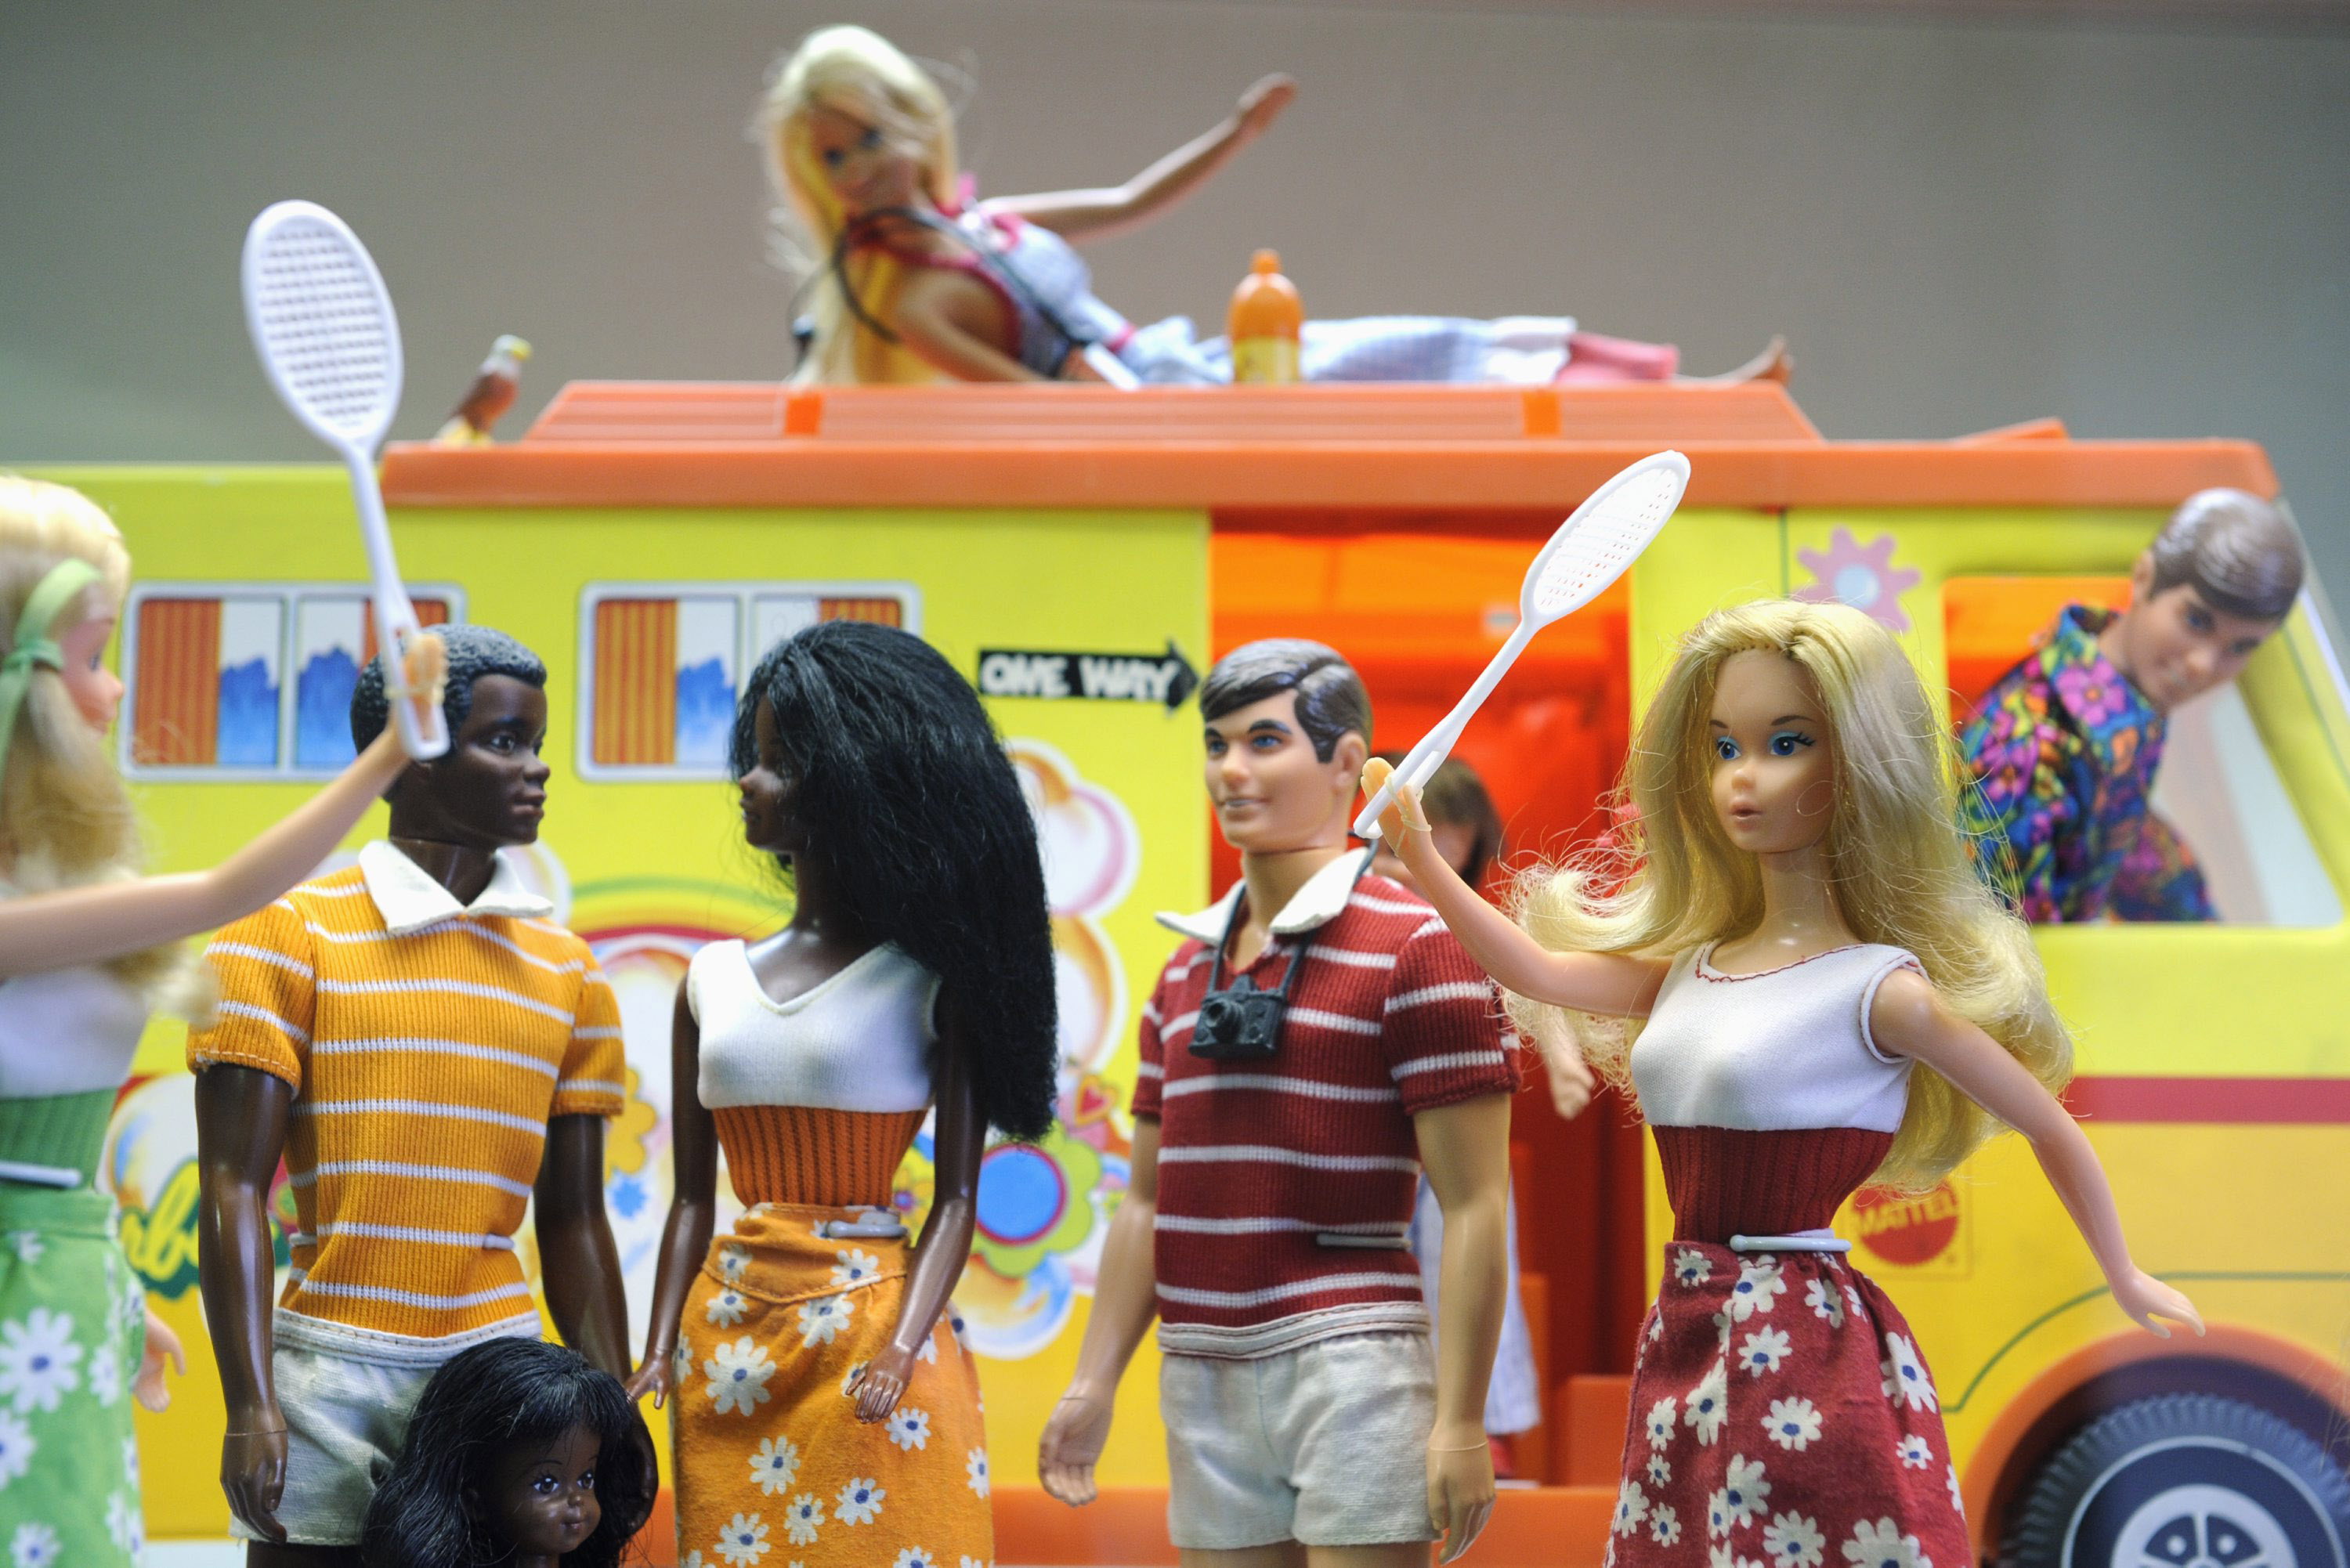 Barbie and Ken dolls are on display at t